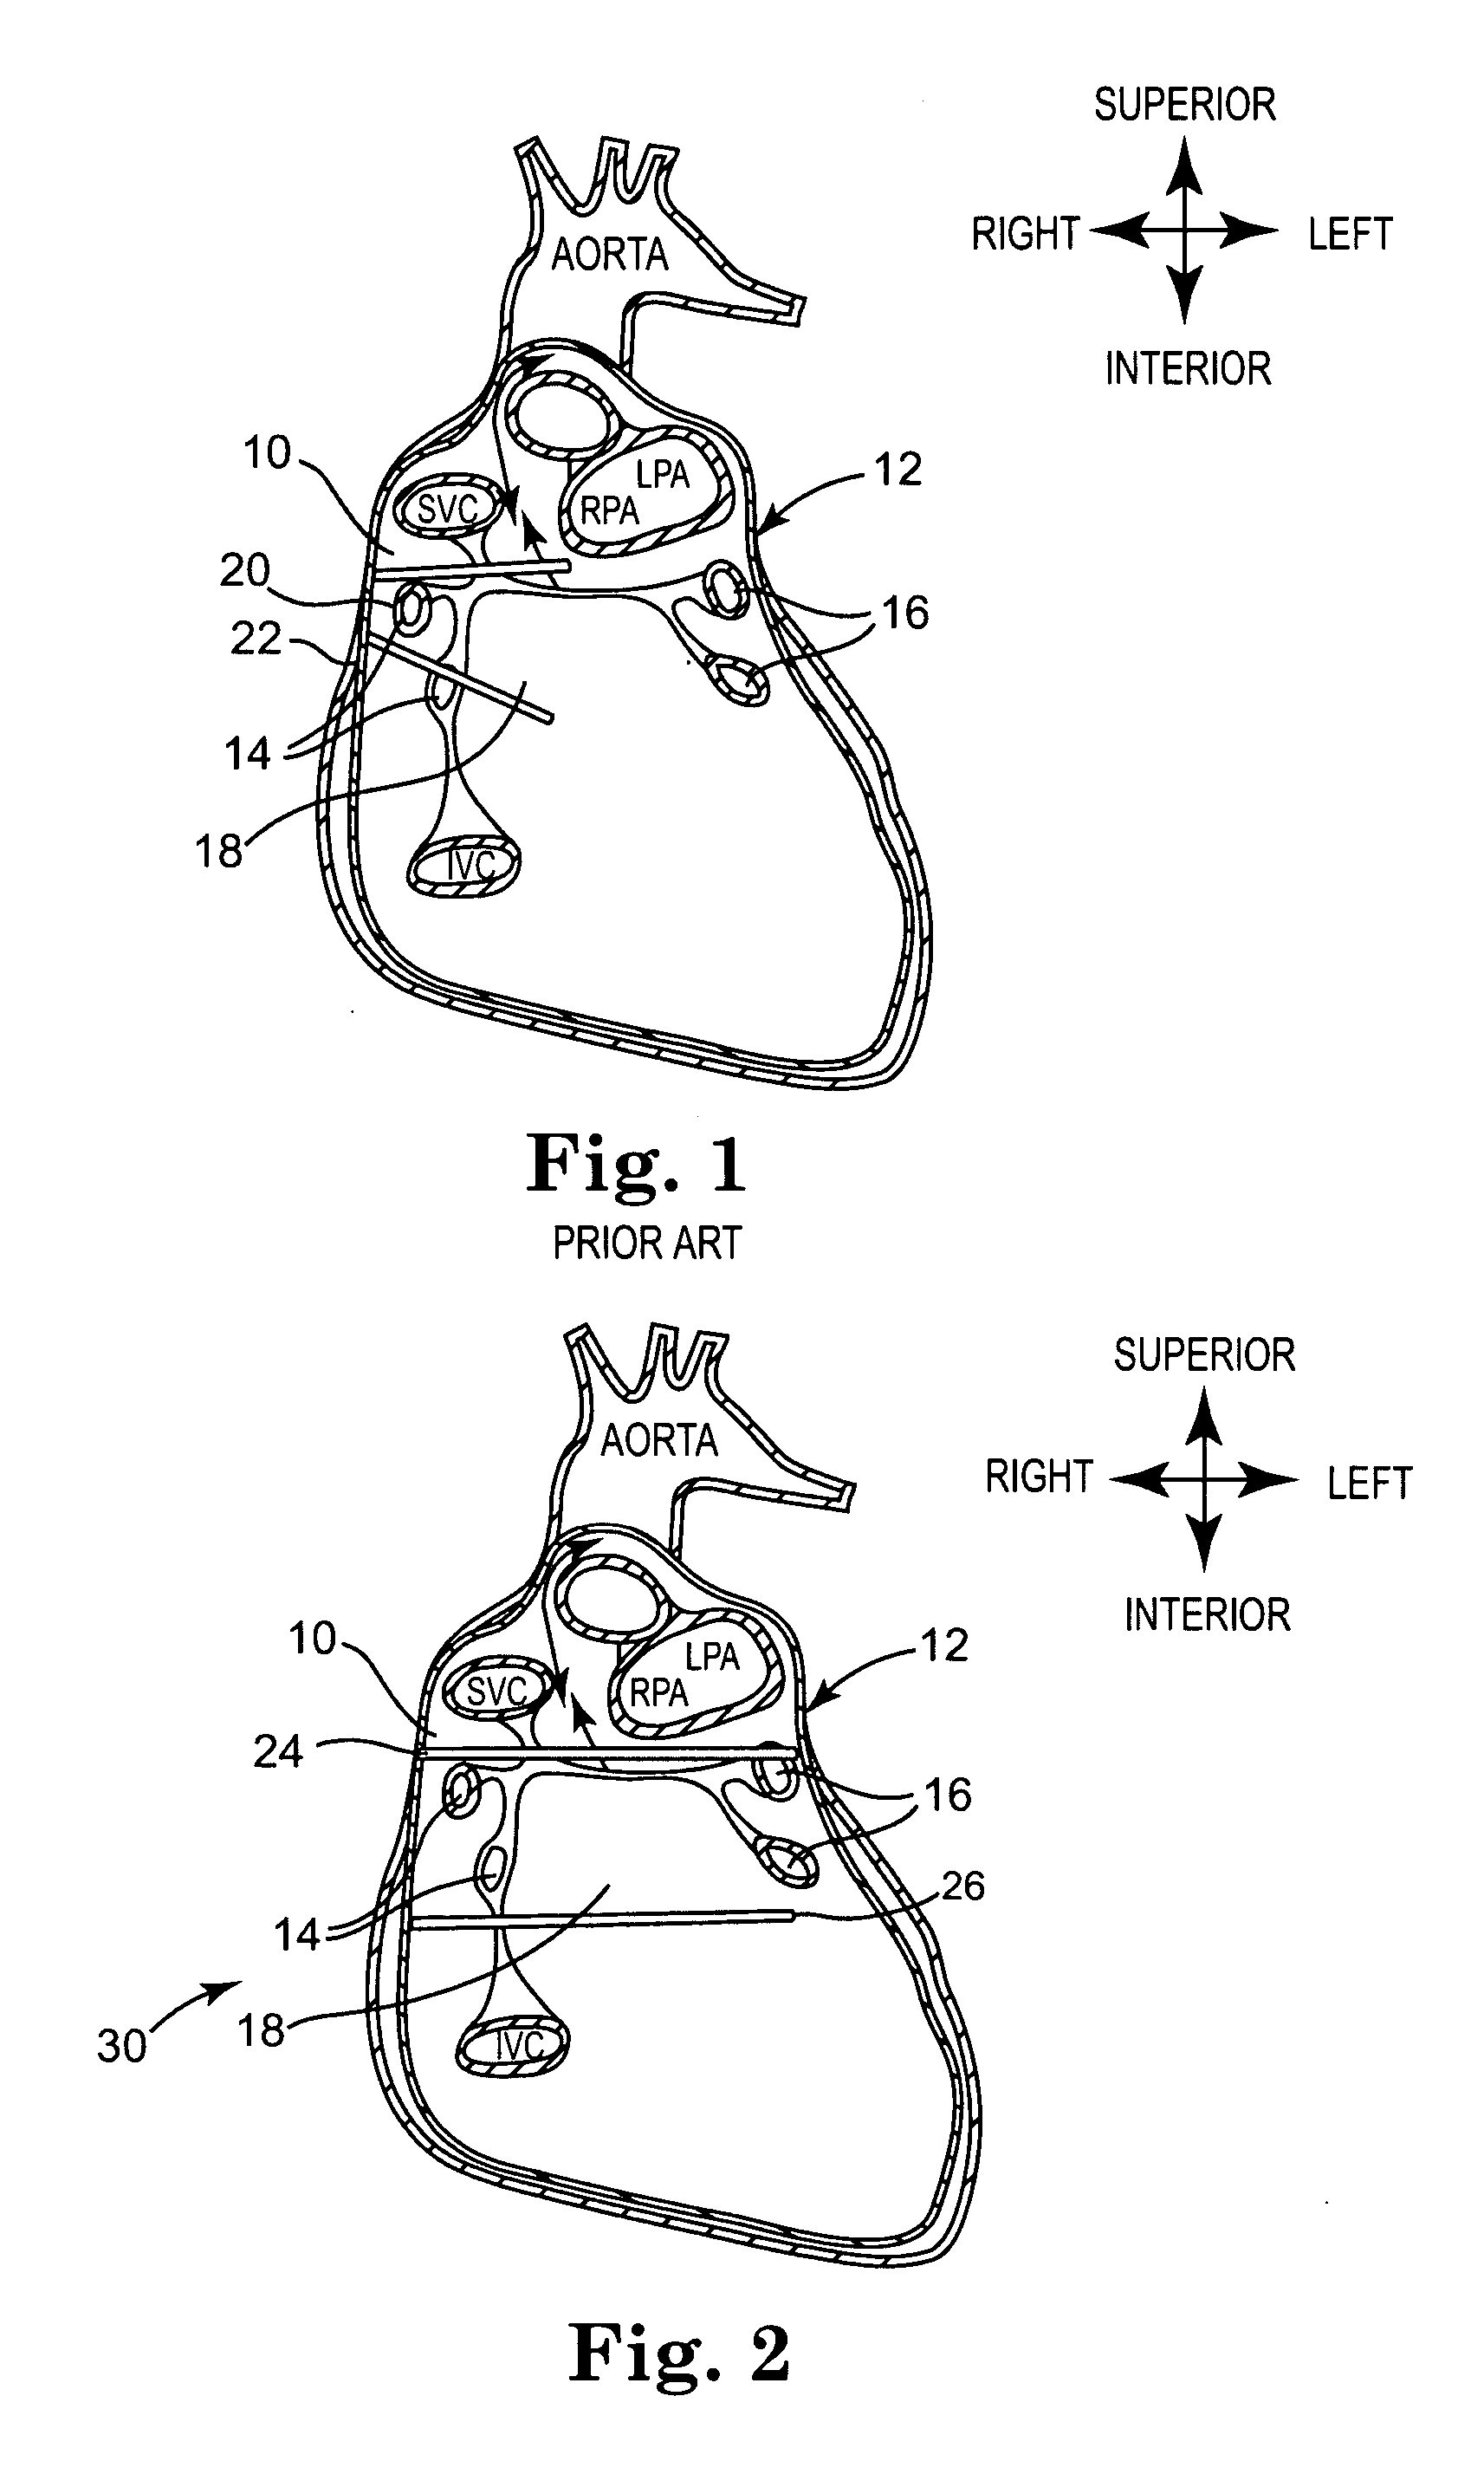 Compound bipolar ablation device and method